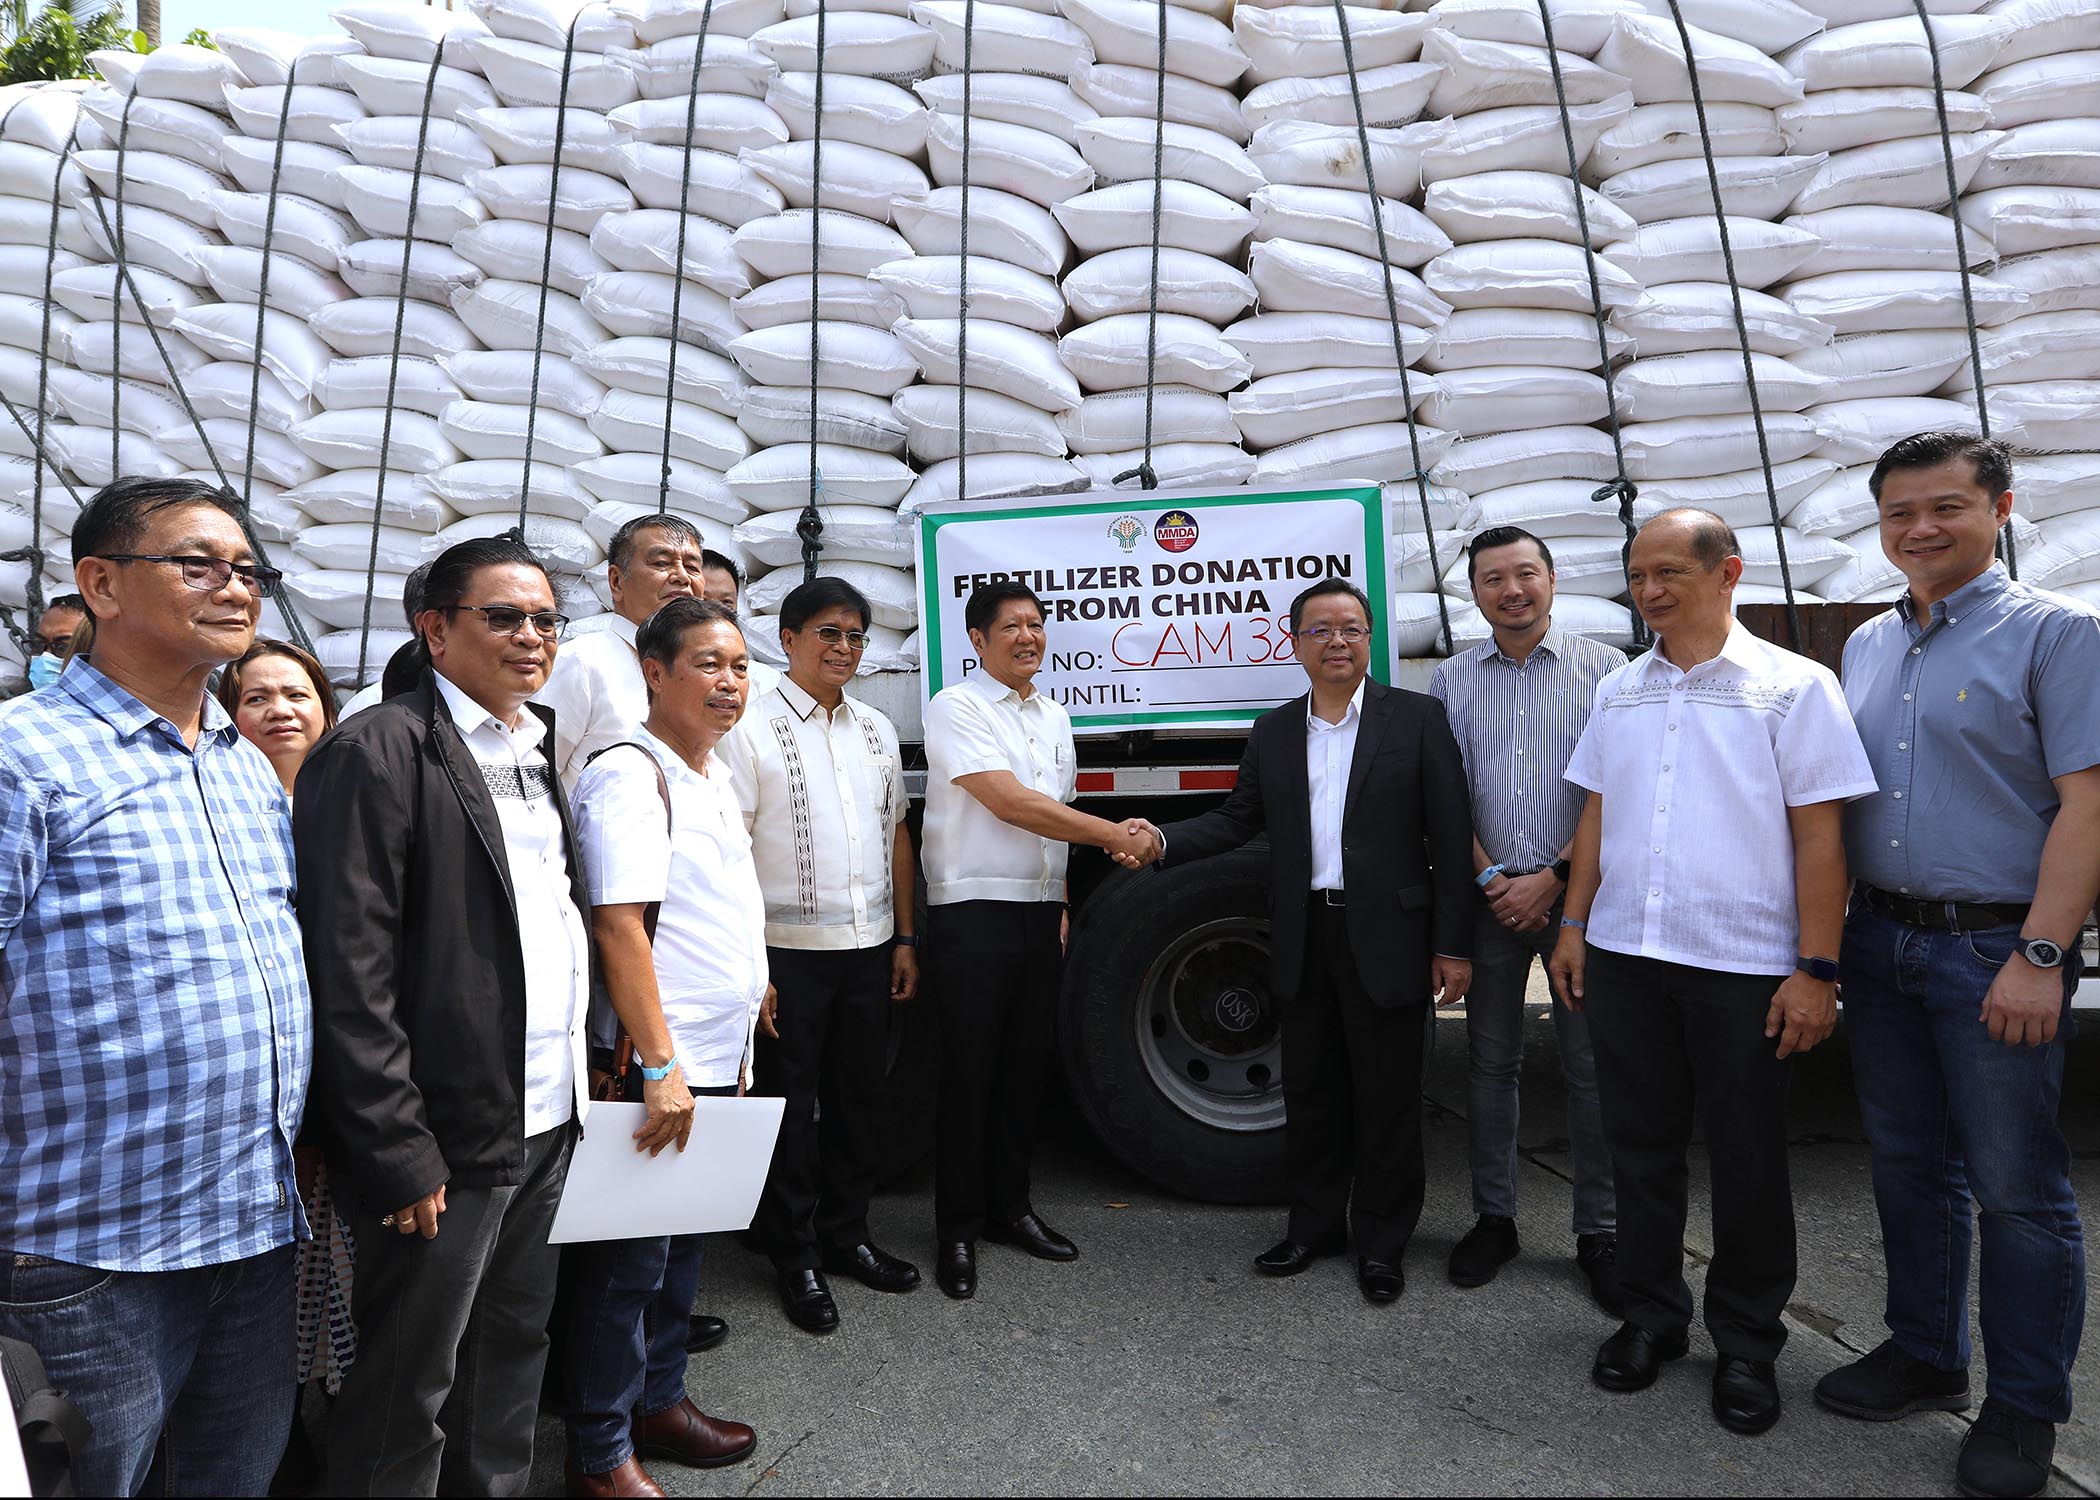 Ceremonial turnover of the fertilizer donation from the People's Republic of China